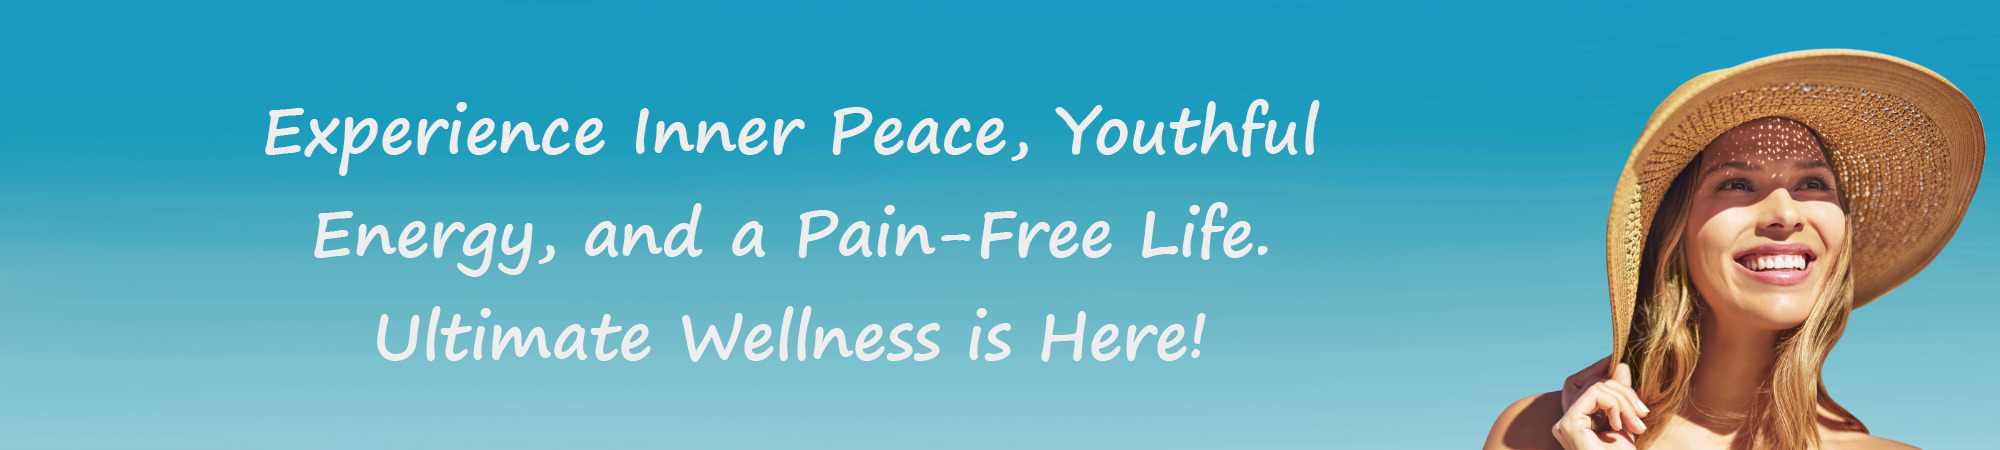 Experience Inner Peace, Youthful Energy, and a Pain-Free Life.